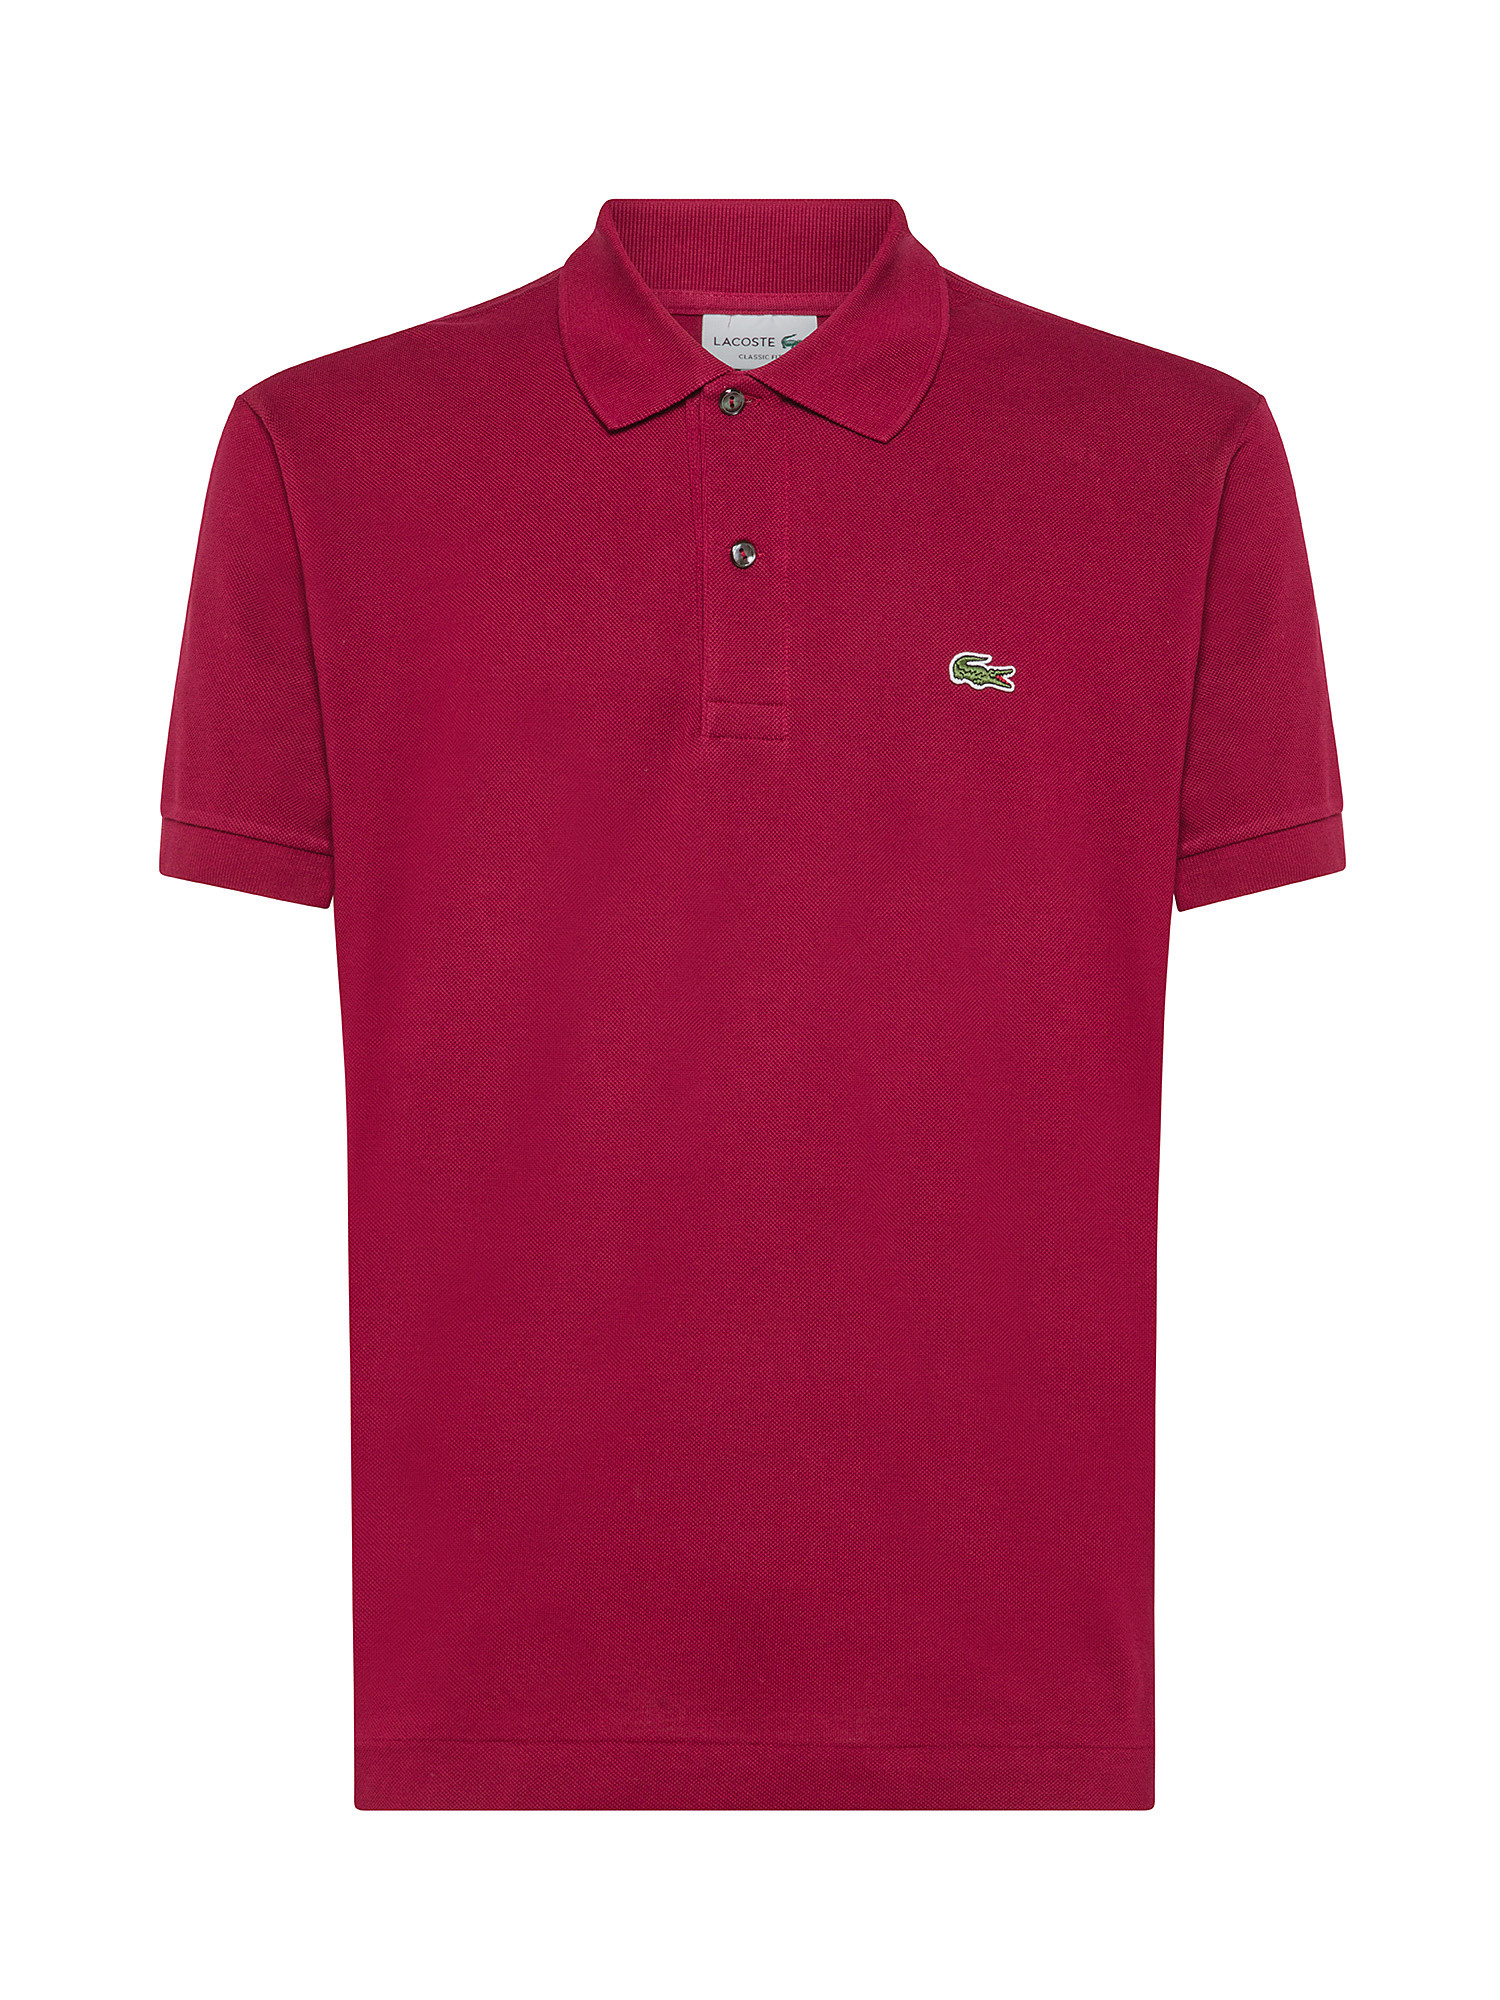 Lacoste - Classic cut polo shirt in petit piquè cotton, Dark Red, large image number 0